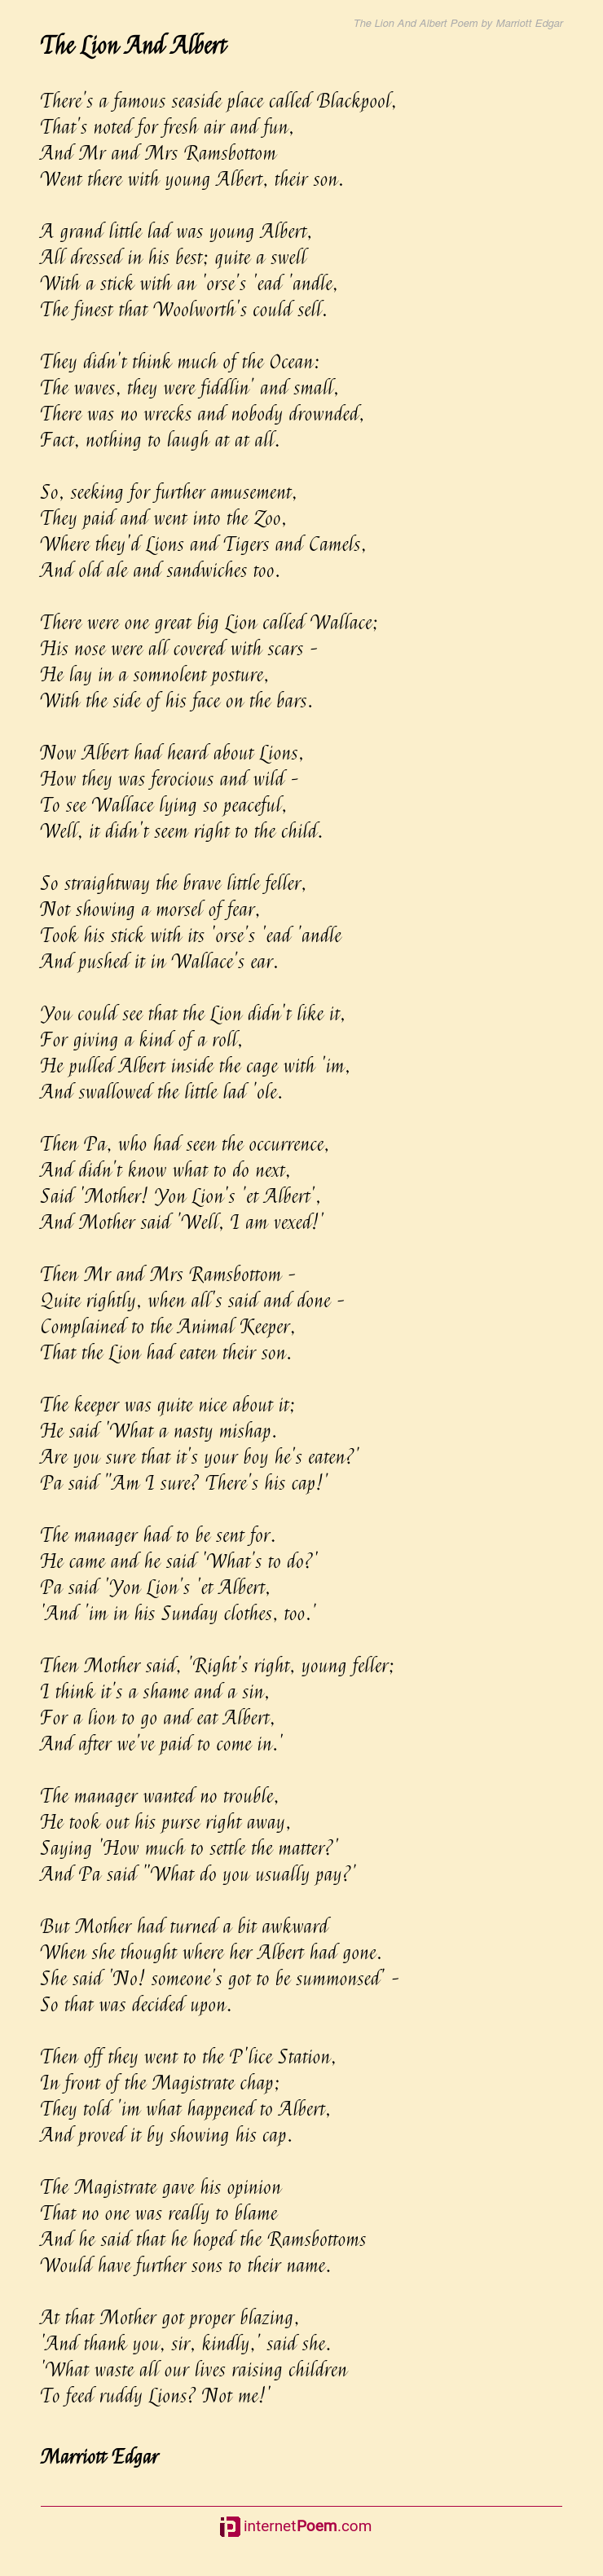 The Lion And Albert Poem by Marriott Edgar